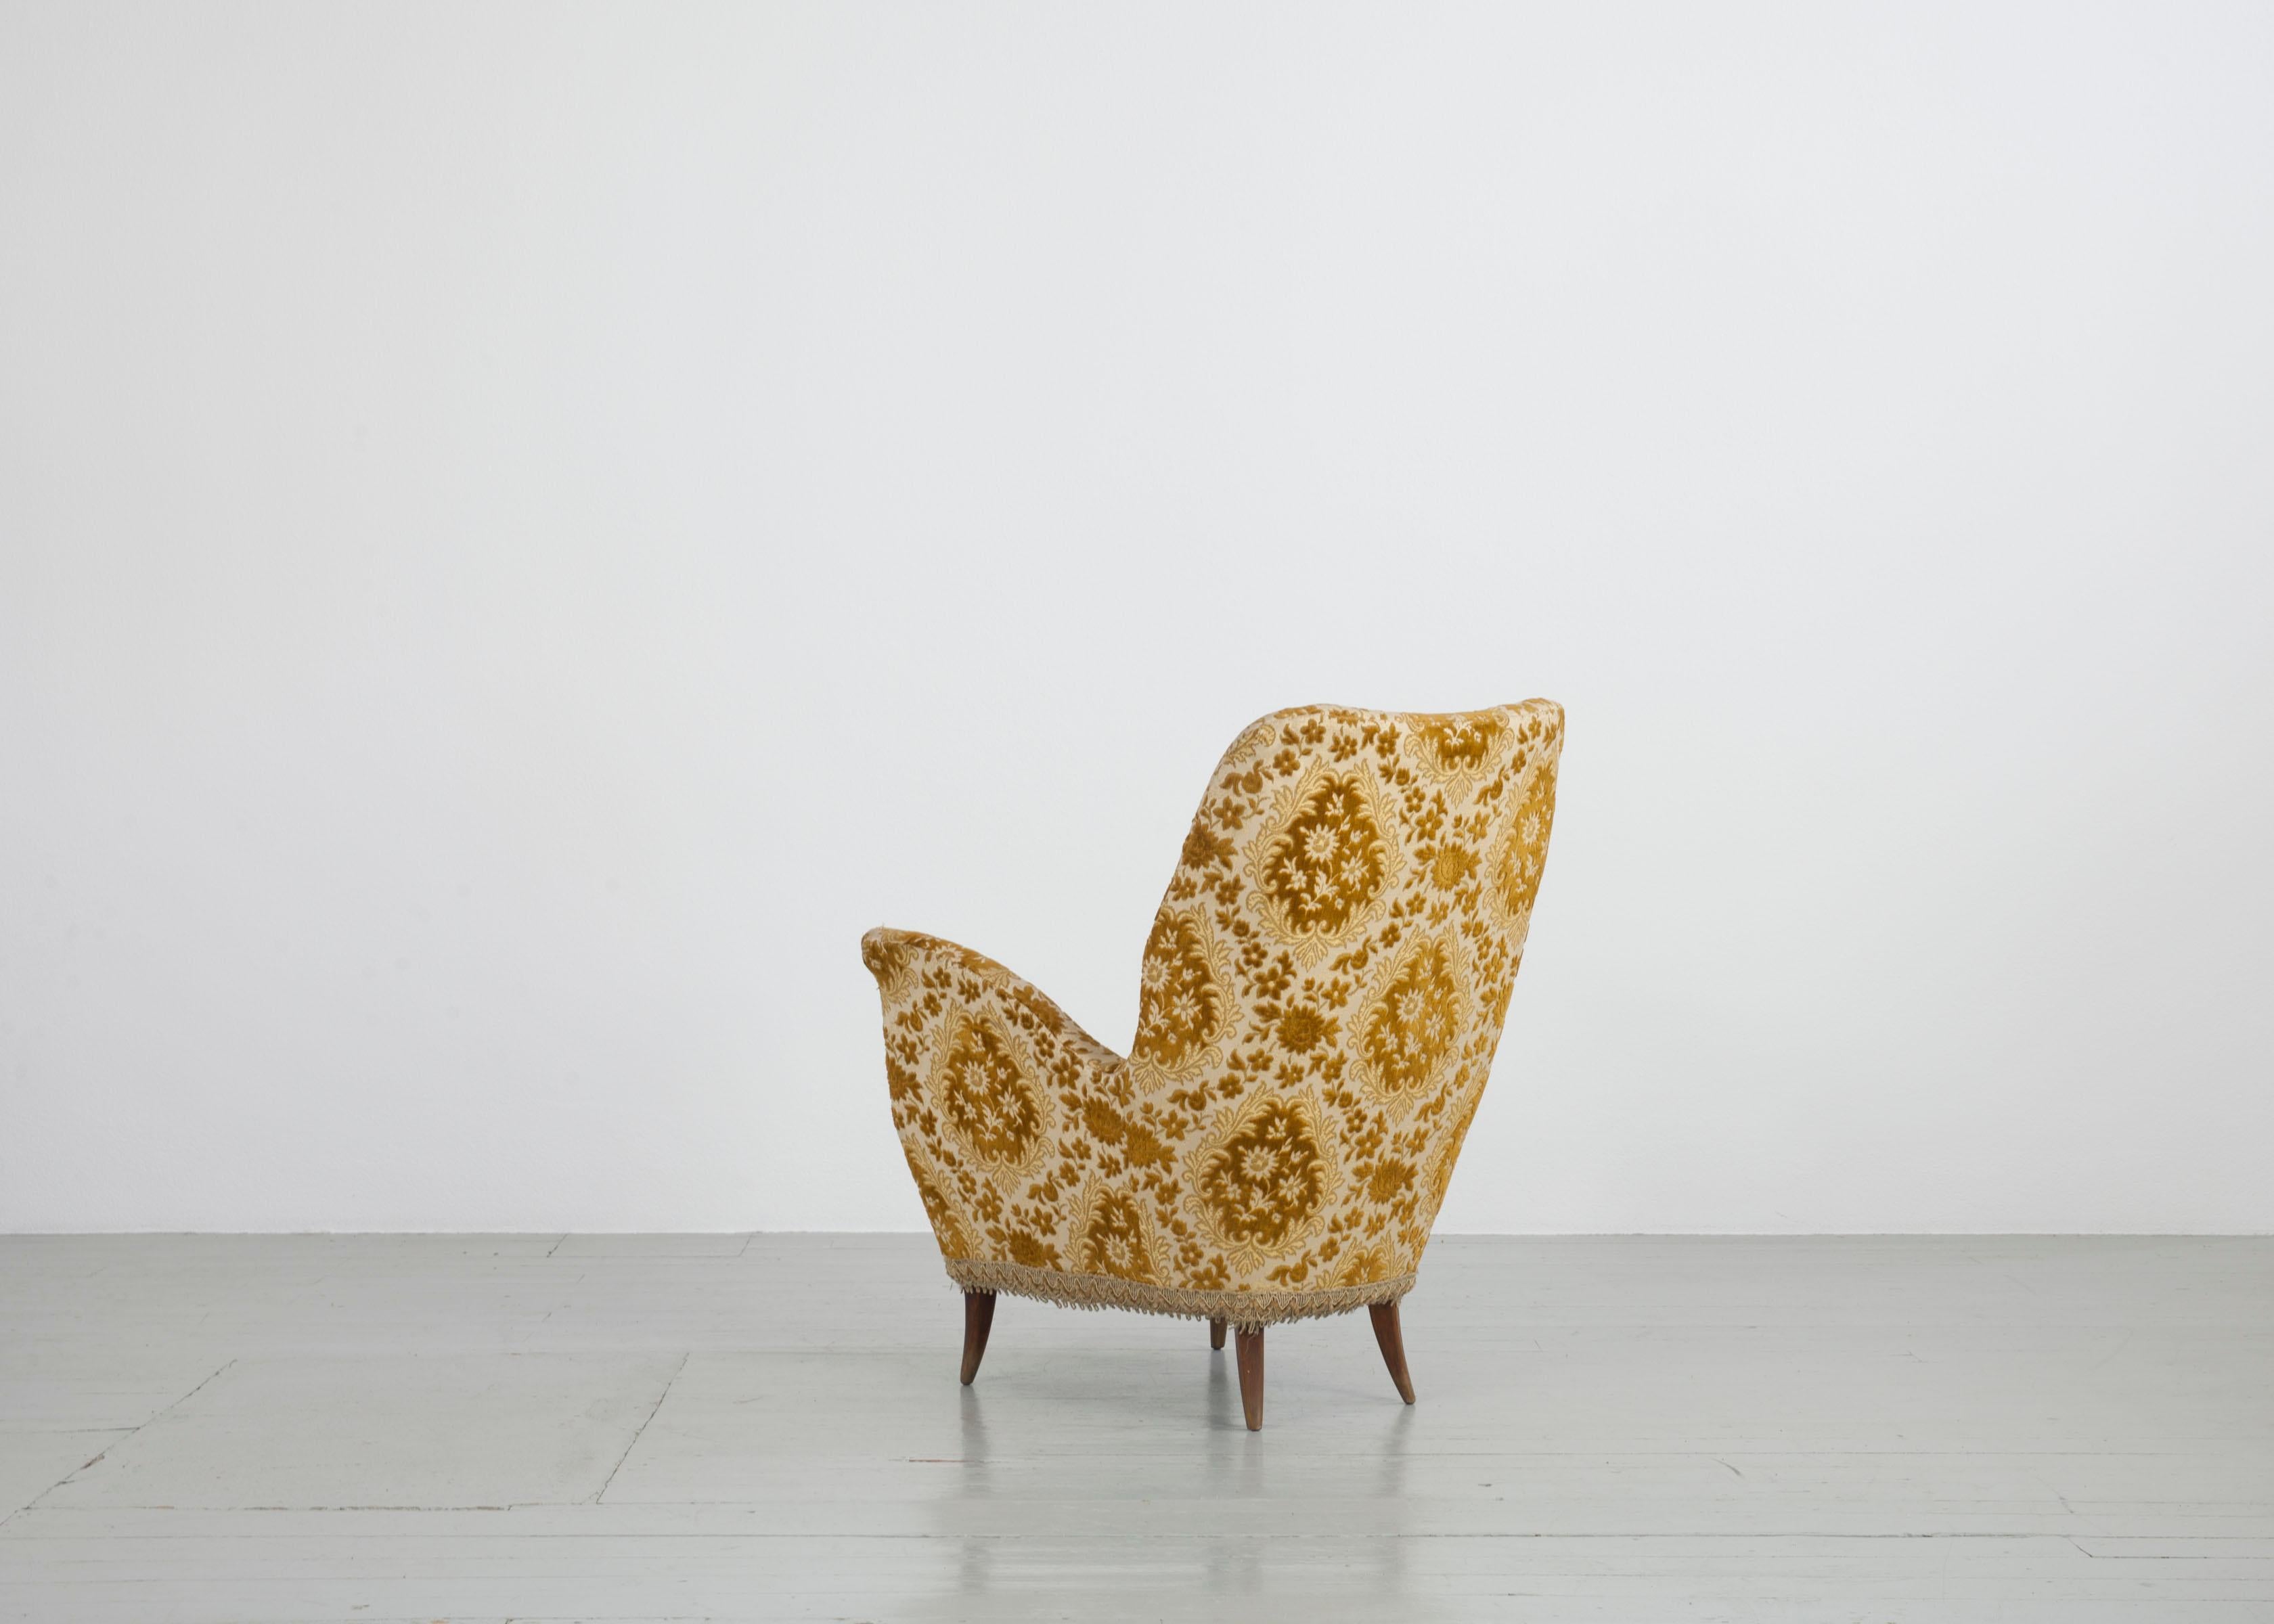 Mid-20th Century Chair - Manufactured by I.S.A. Bergamo, Italy, 1950s For Sale